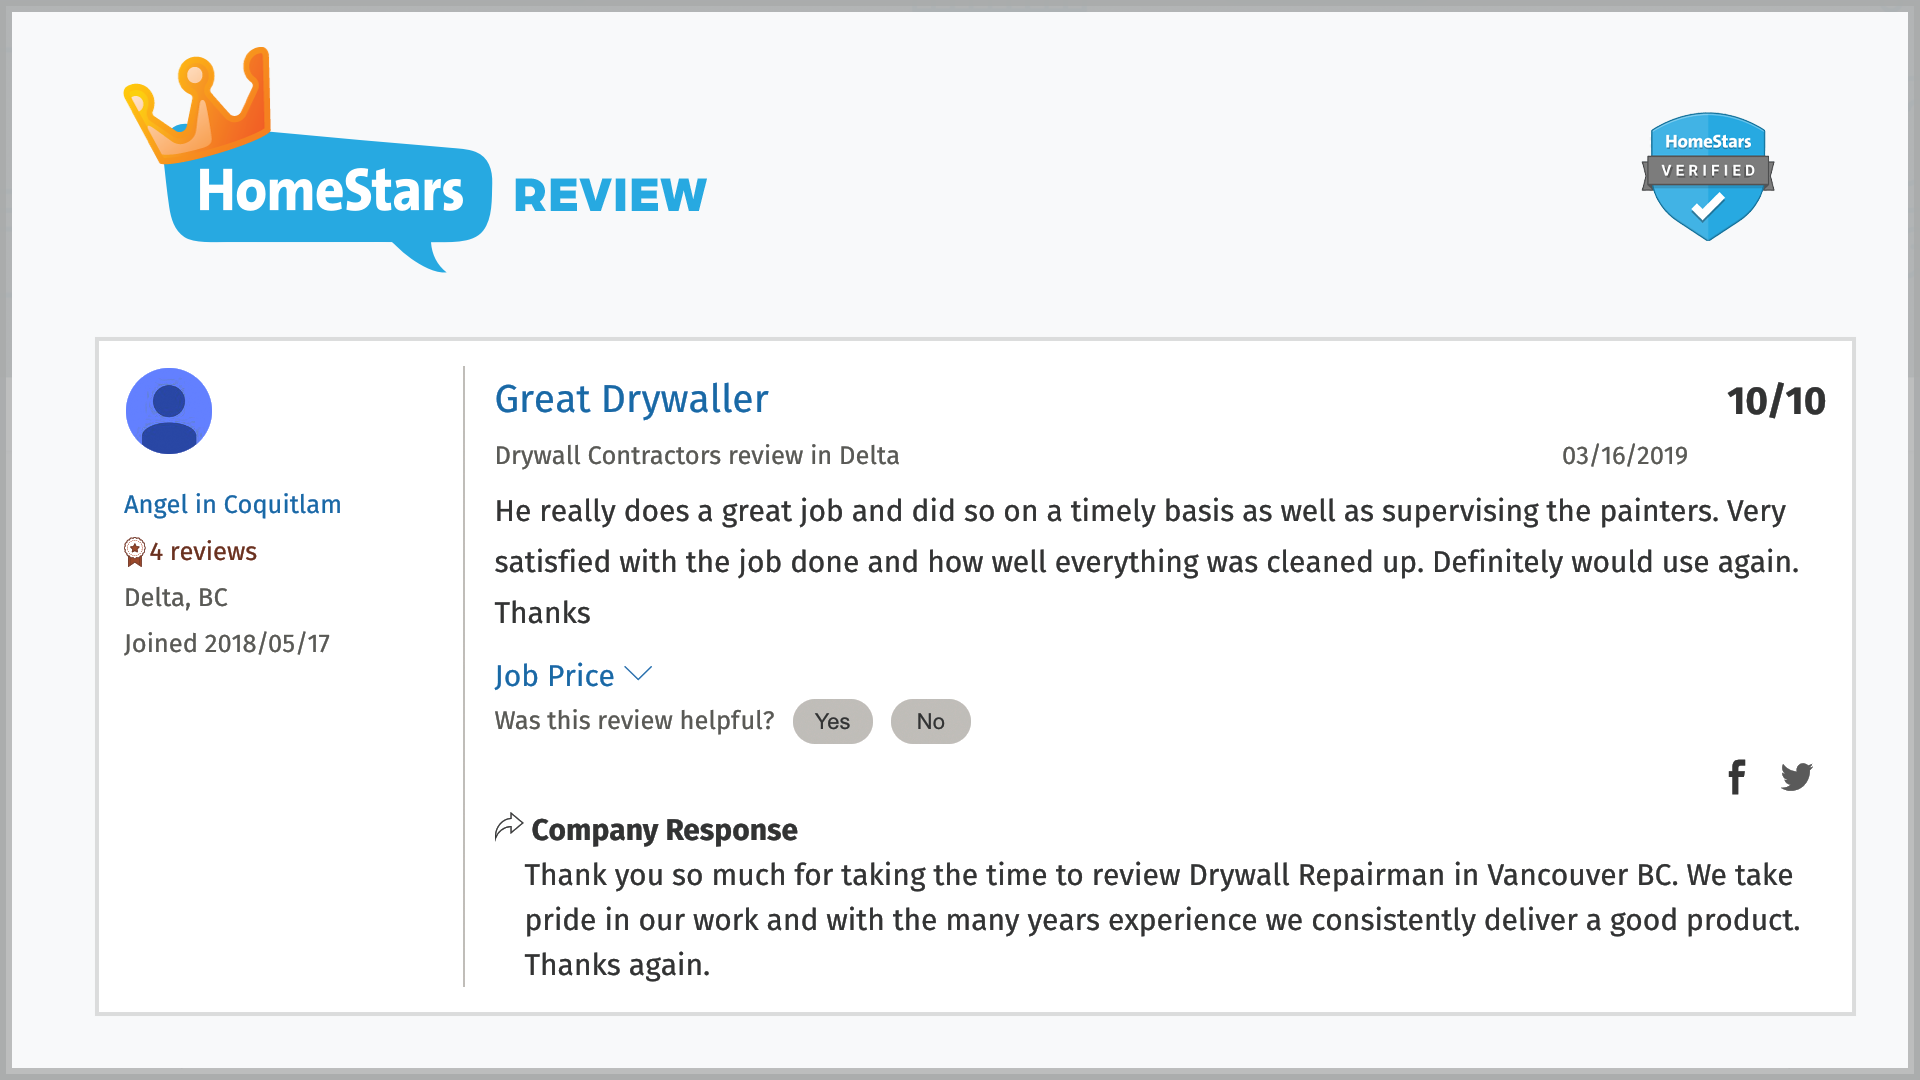 homestars-review-10-out-of-10-drywall-repairman-vancouver-bc-canada-11